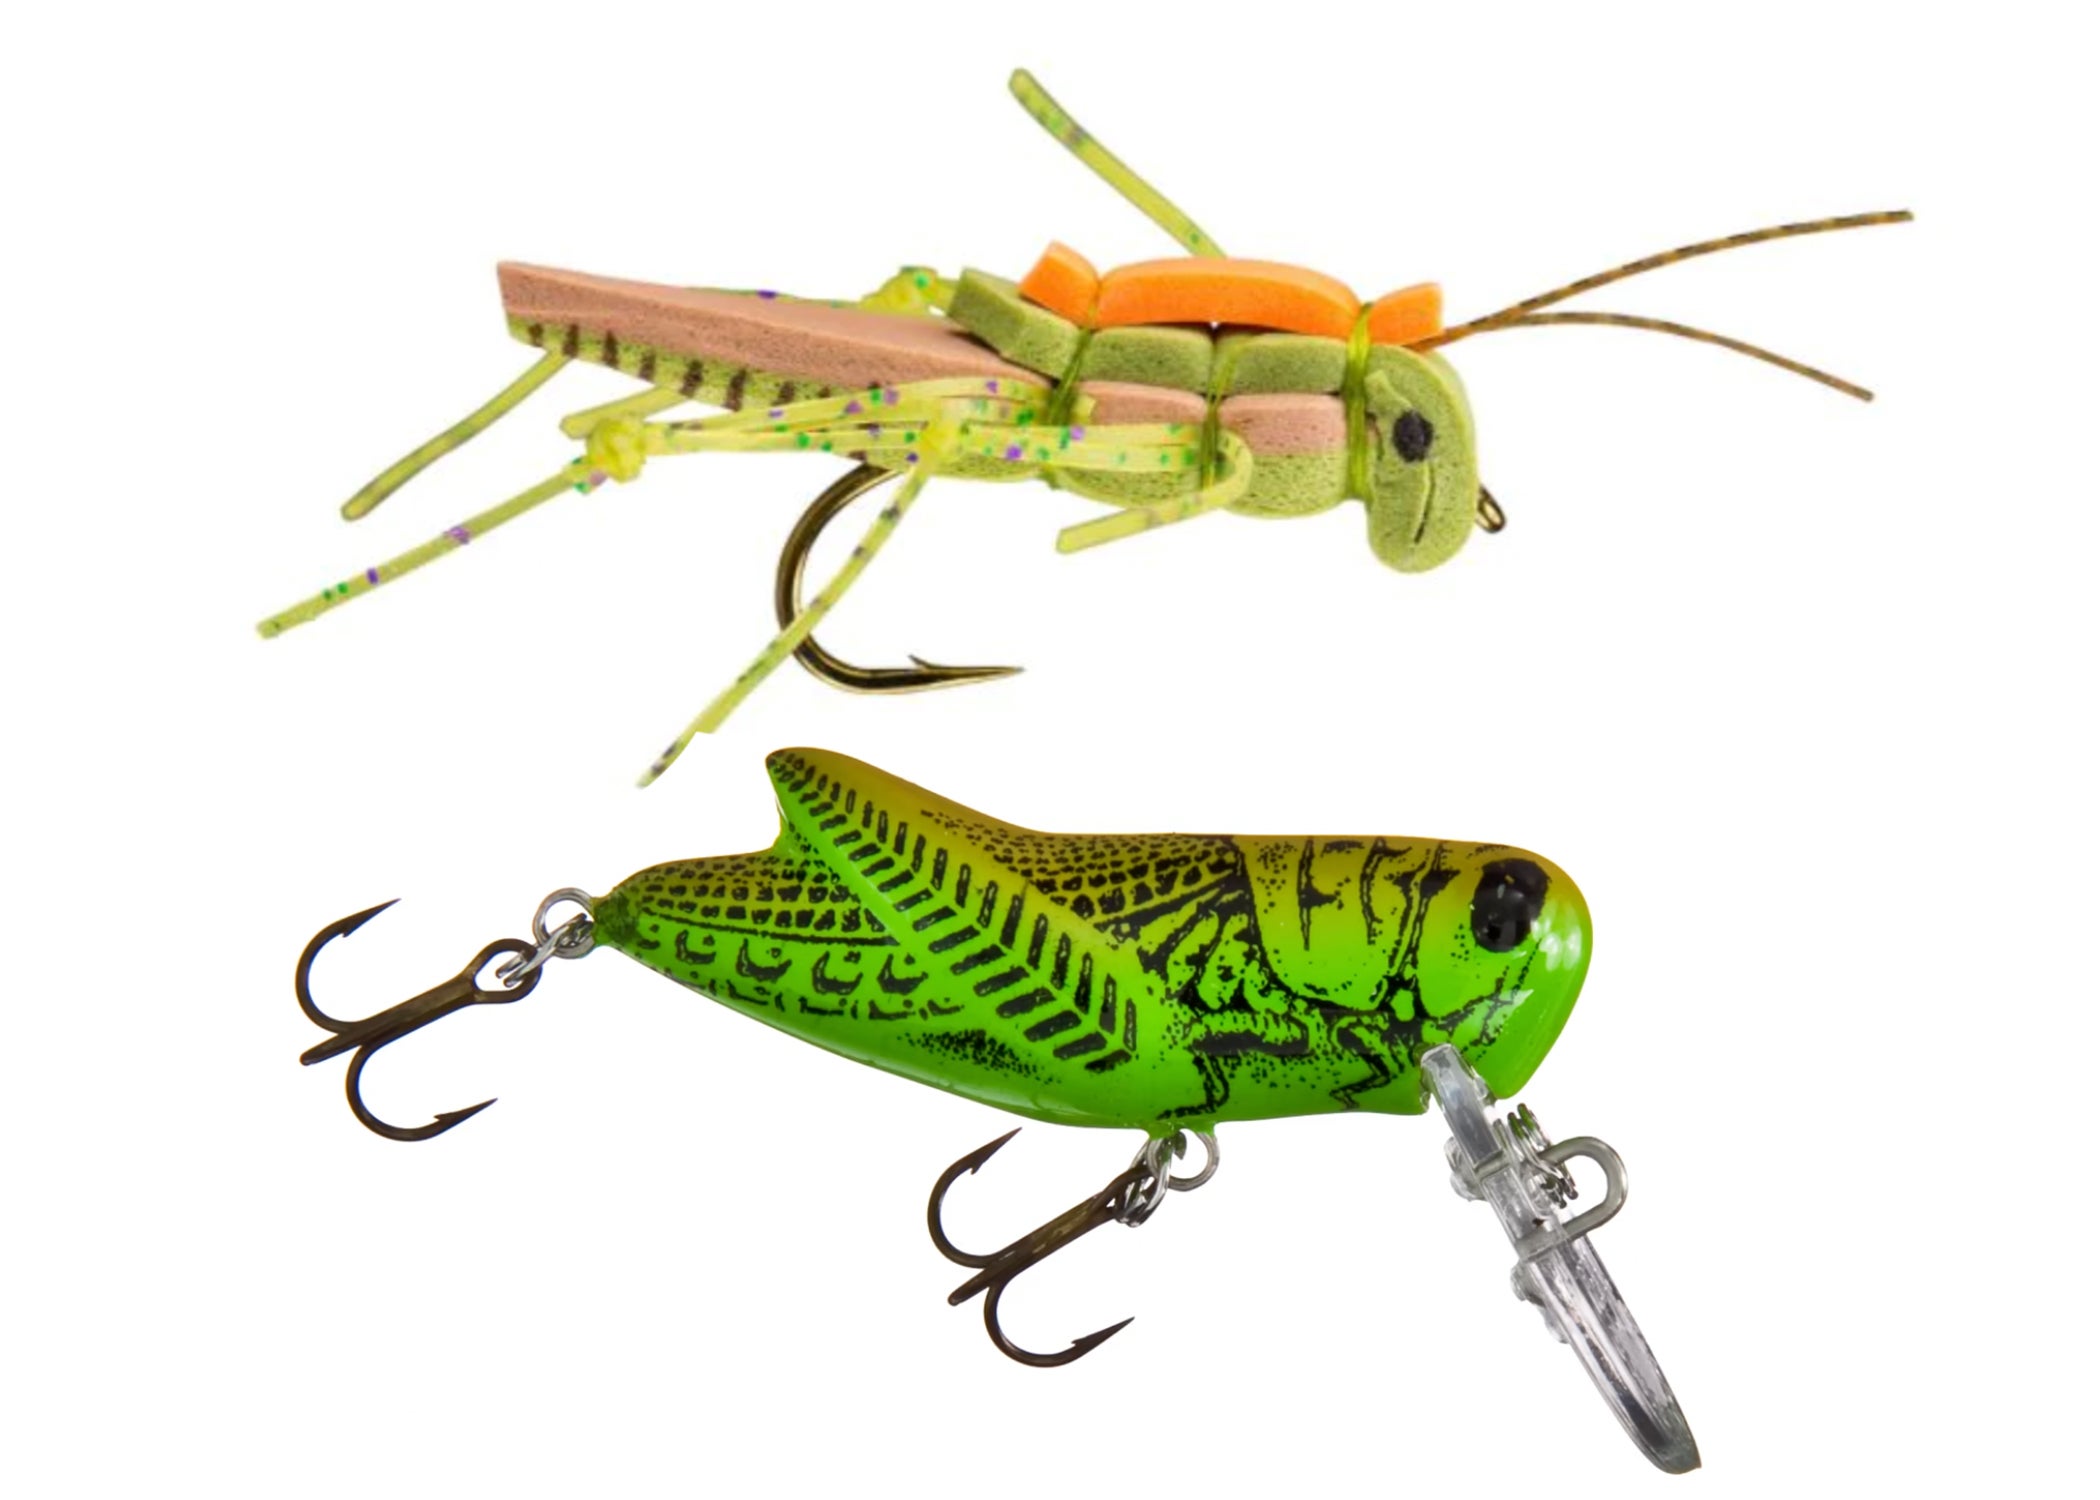 photo of grasshopper fly and lure